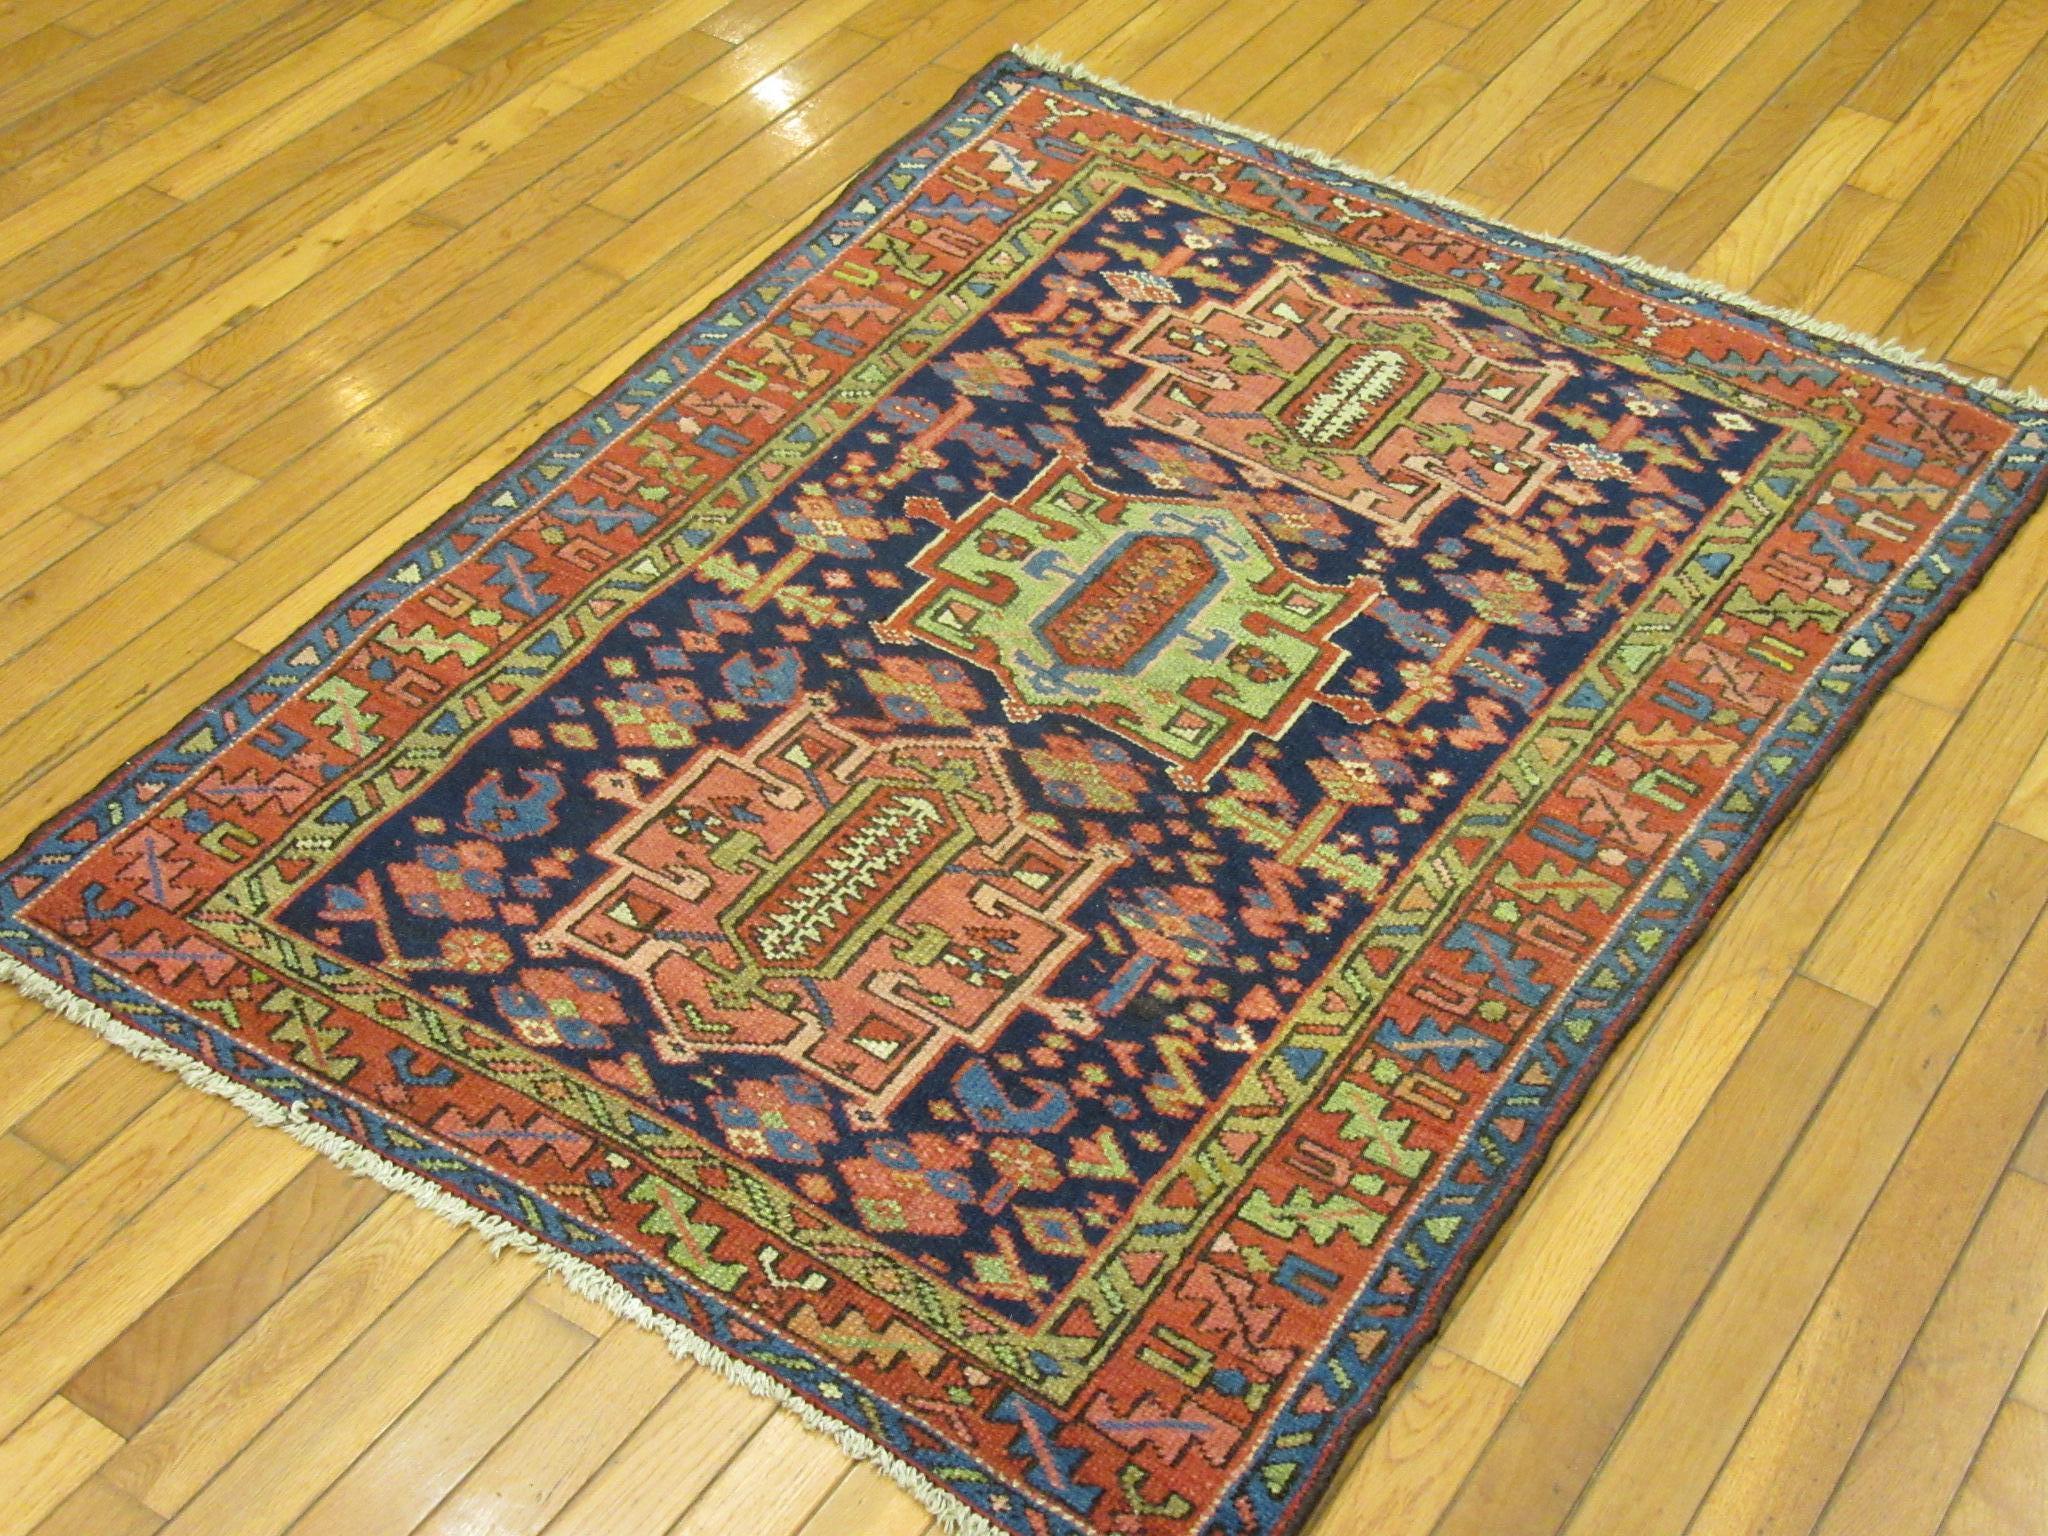 Small Antique Hand-Knotted Wool Persian Heriz Rug 2